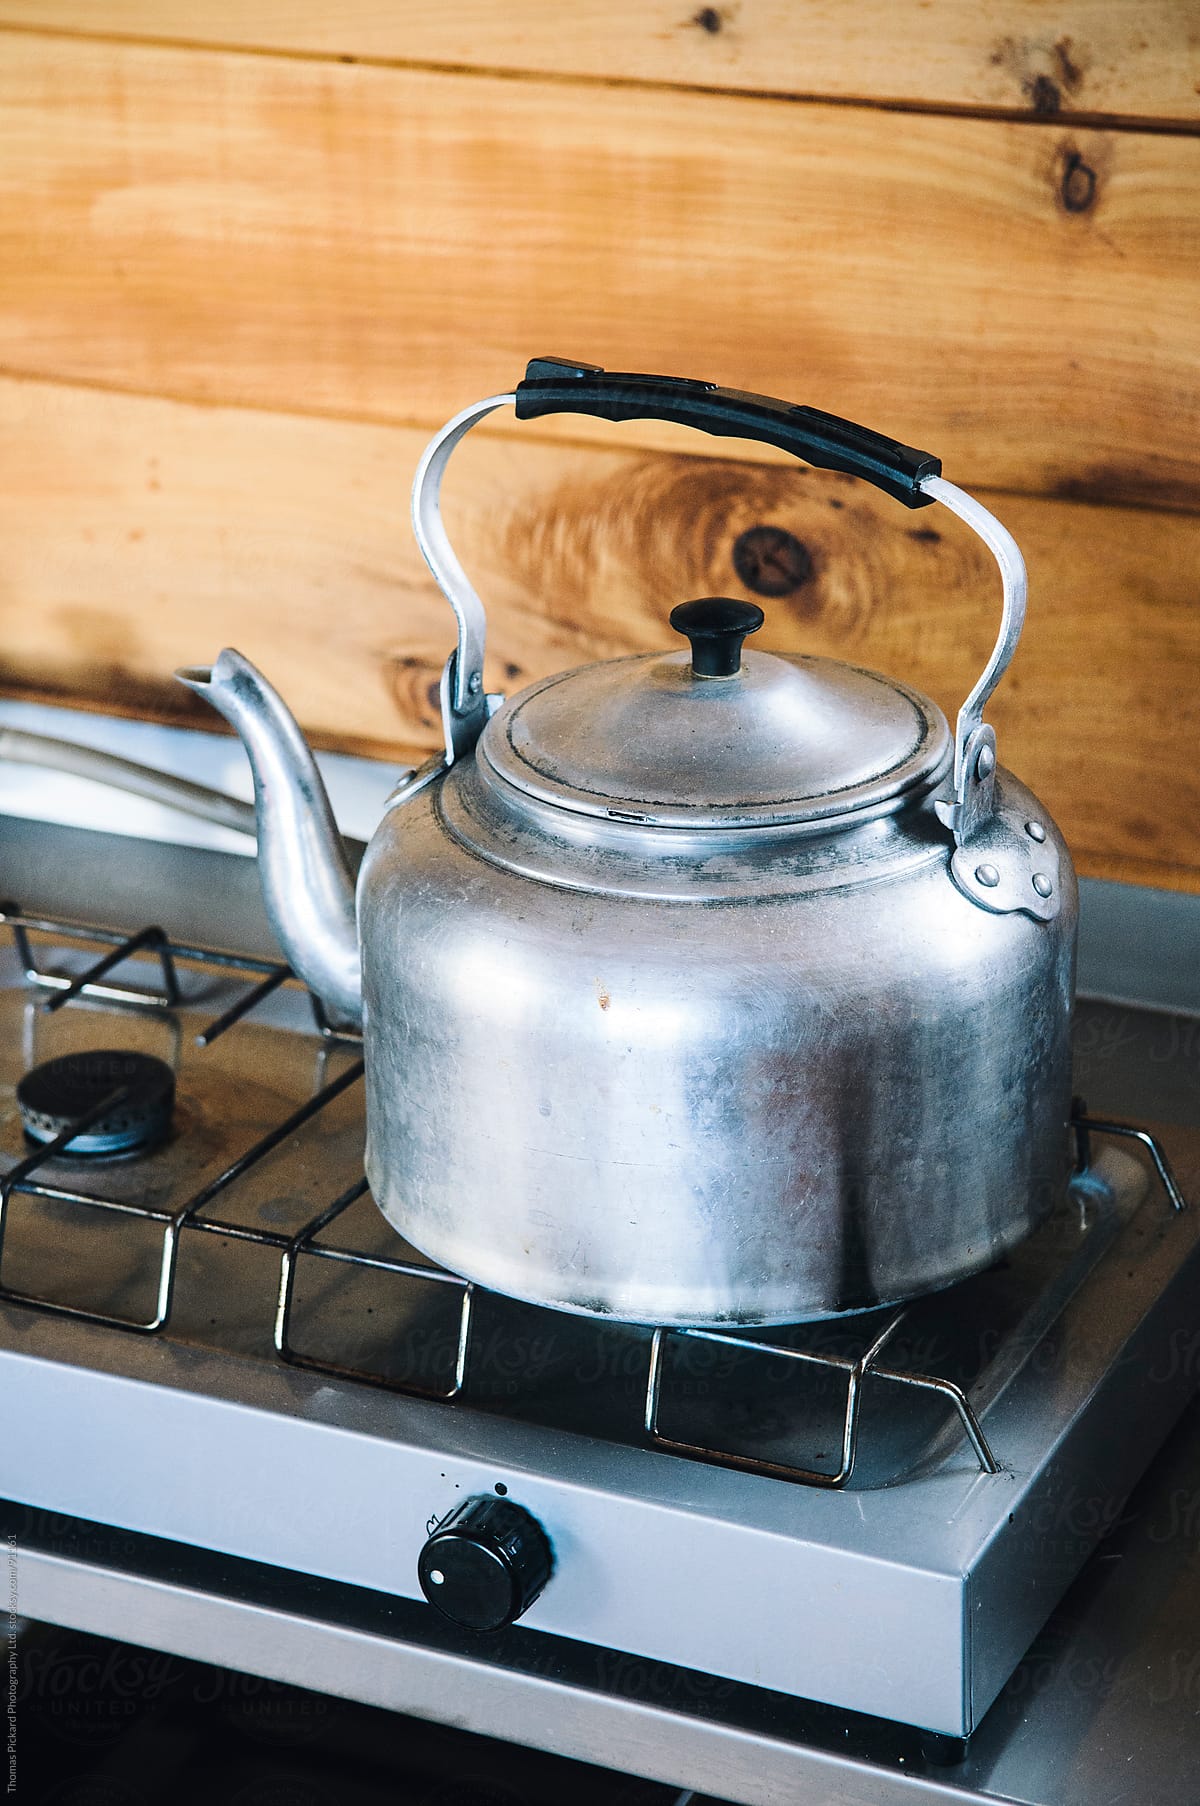 Old fashion kettle on a gas cook top inside a cabin / hut, New Zealand.